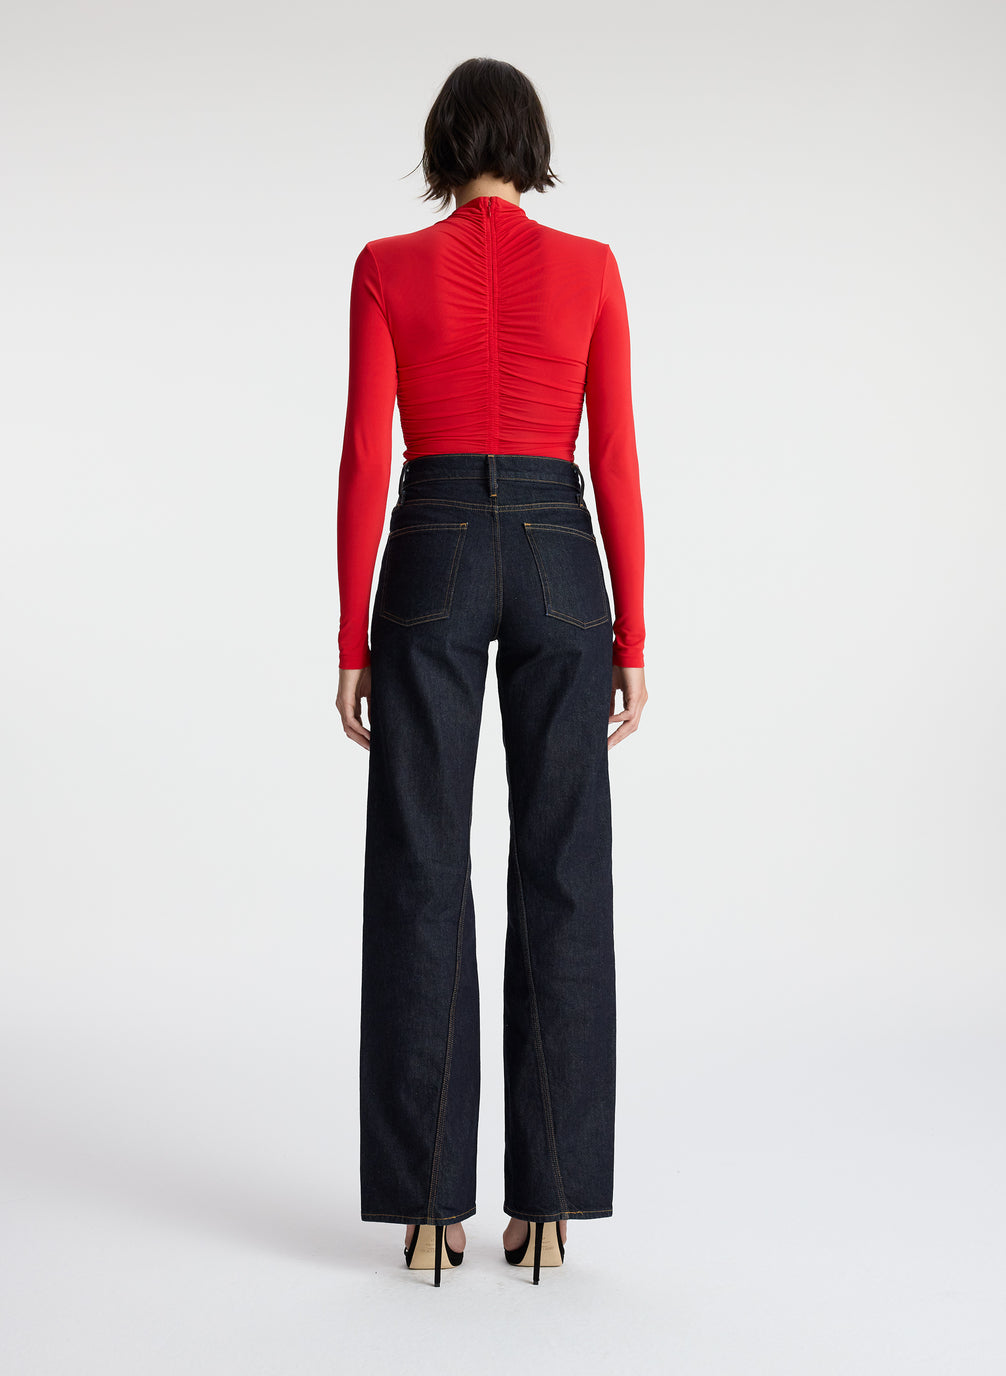 back view of woman wearing red ruched long sleeve top and dark wash jeans